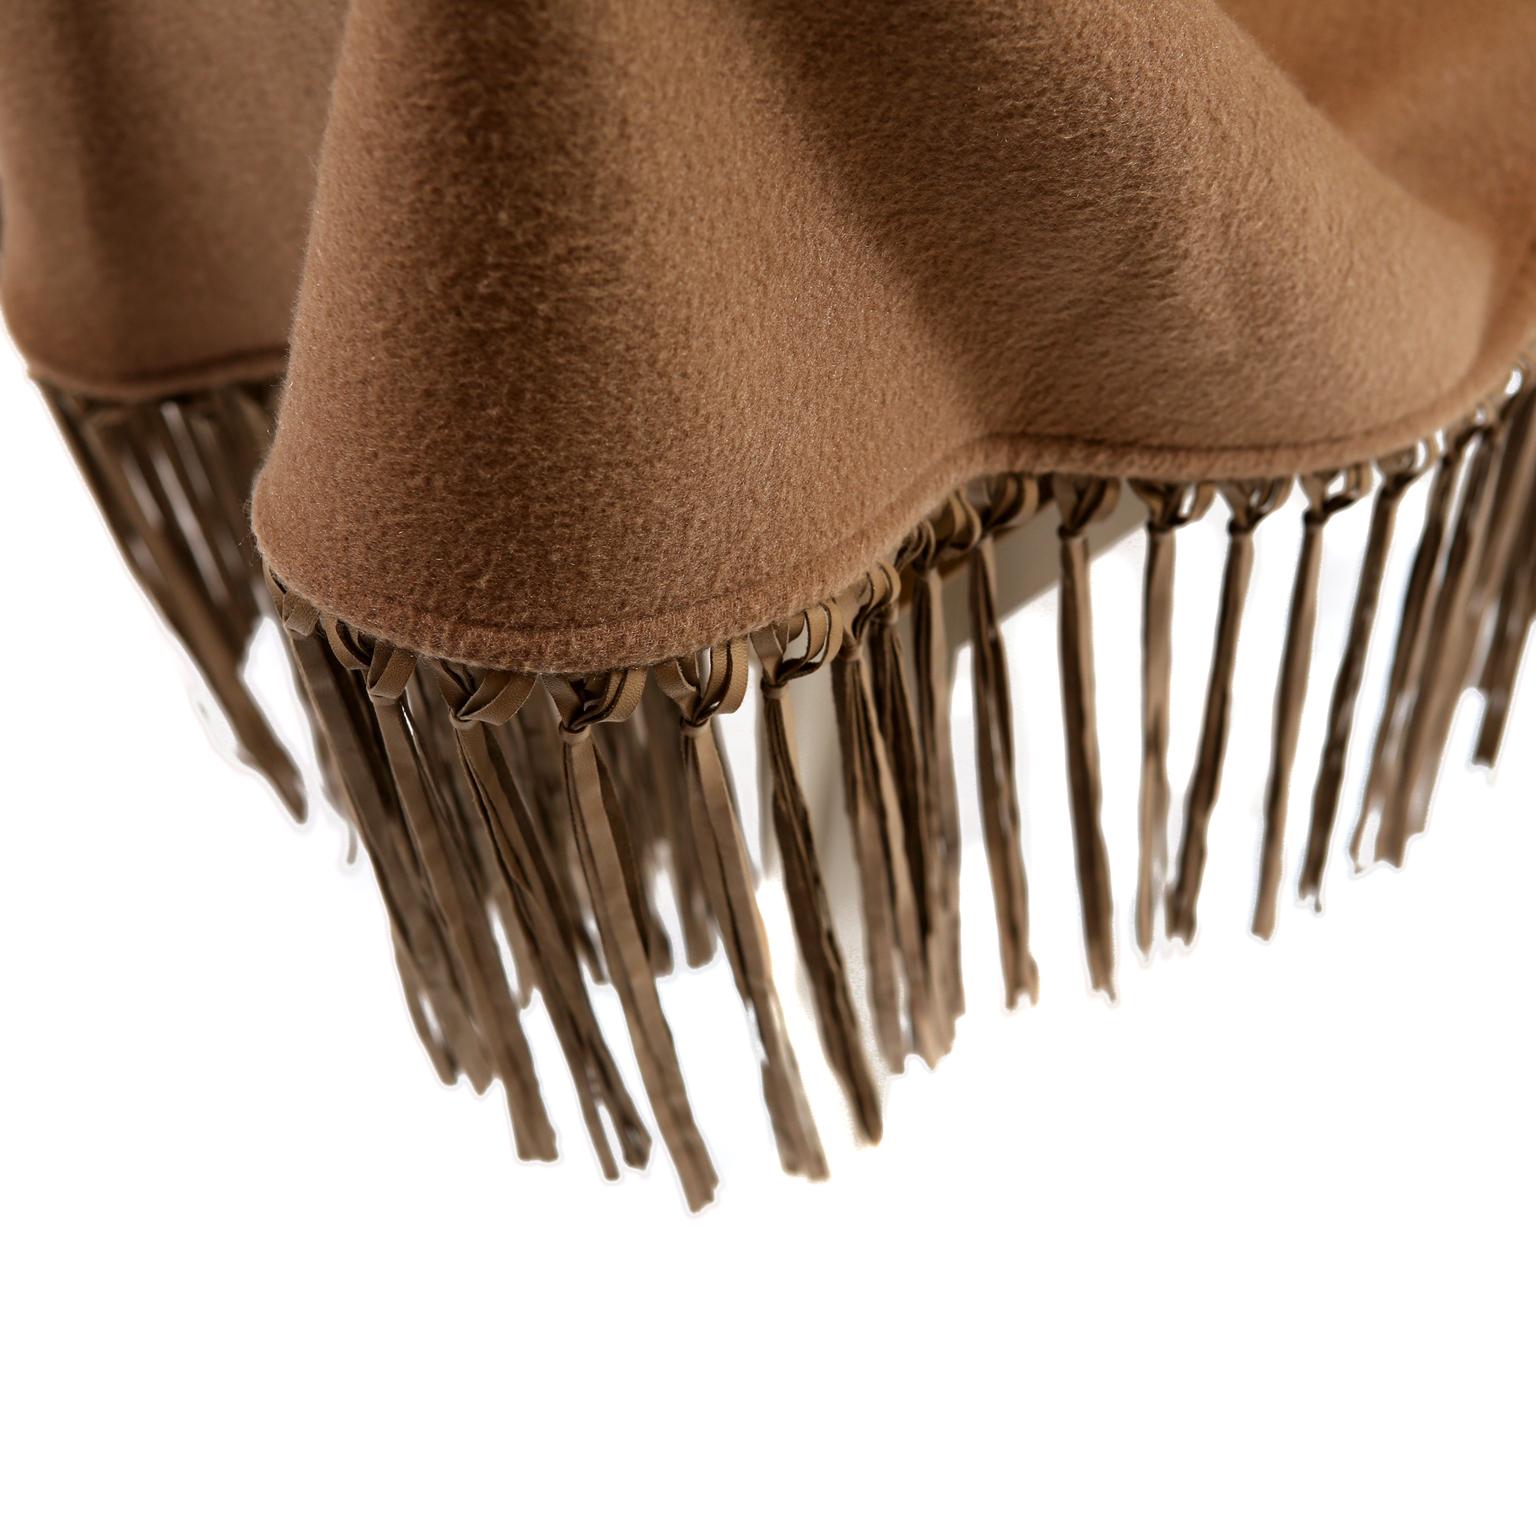 Hermès Brown Cashmere XXL Shawl- Never Worn
 Rare and collectible.  Brown very heavy cashmere with leather fringe. Made in France.  

Measurements: 78